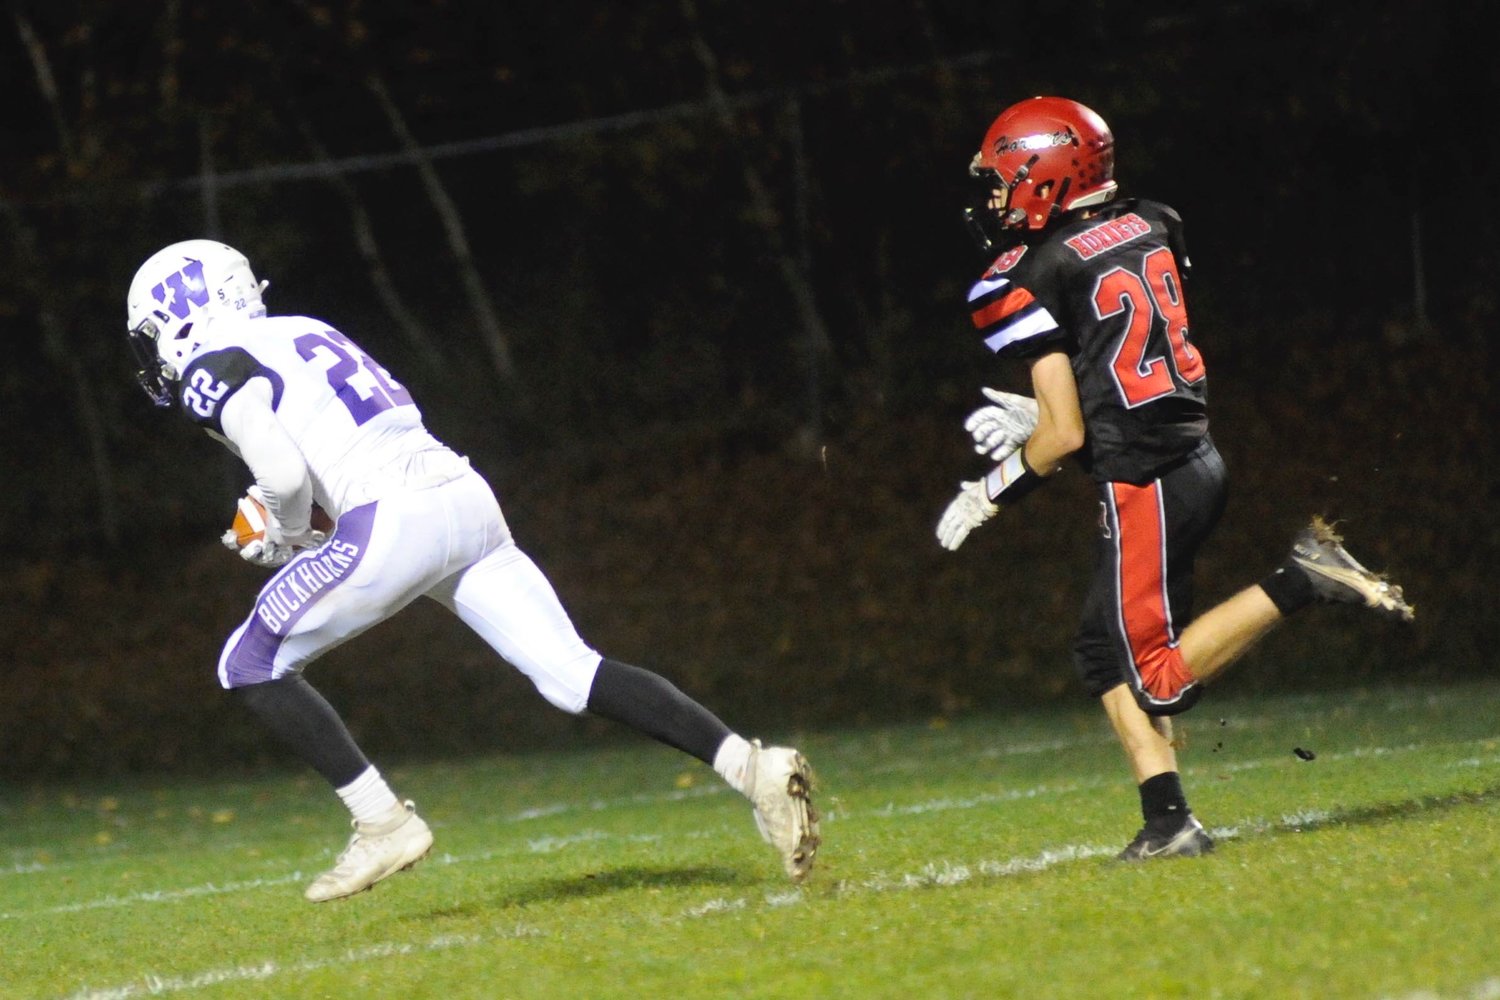 Touchdown bound. Wallenpaupack’s TJ Schmalzle scores the first touchdown of the game on a 48-yard reception from QB Alex Gardsy in the second frame as Honesdale’s Kage Southerton gives chase.